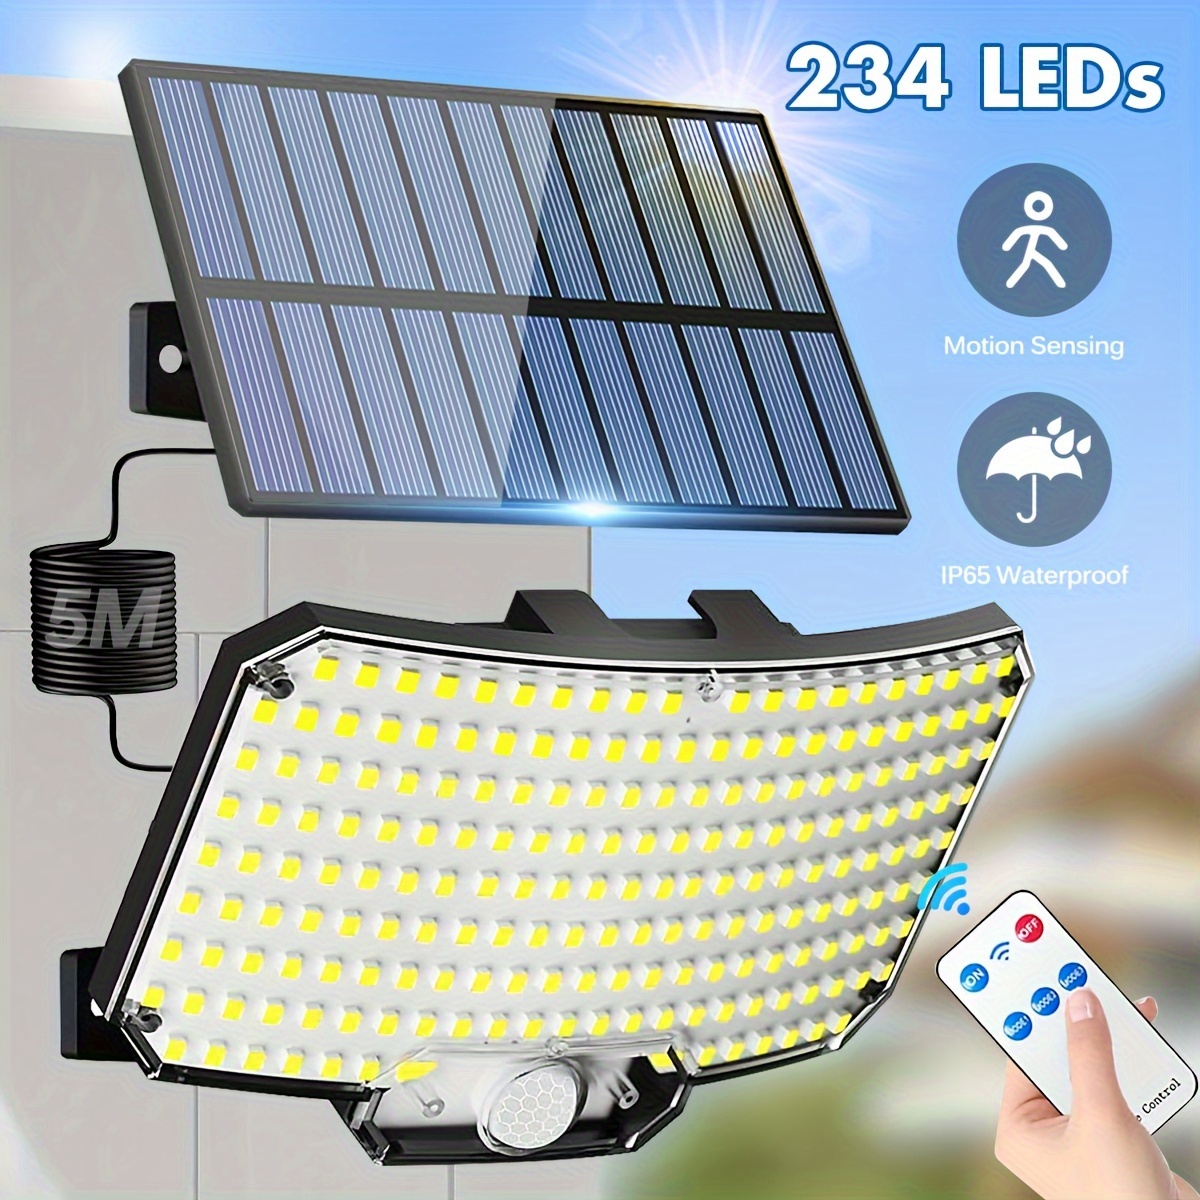 

Solar-powered Outdoor Lights With Motion Sensor - 234 Led, 6500k, Remote Control, Waterproof Security Lighting For Yard, Garden, Pathway & Fence